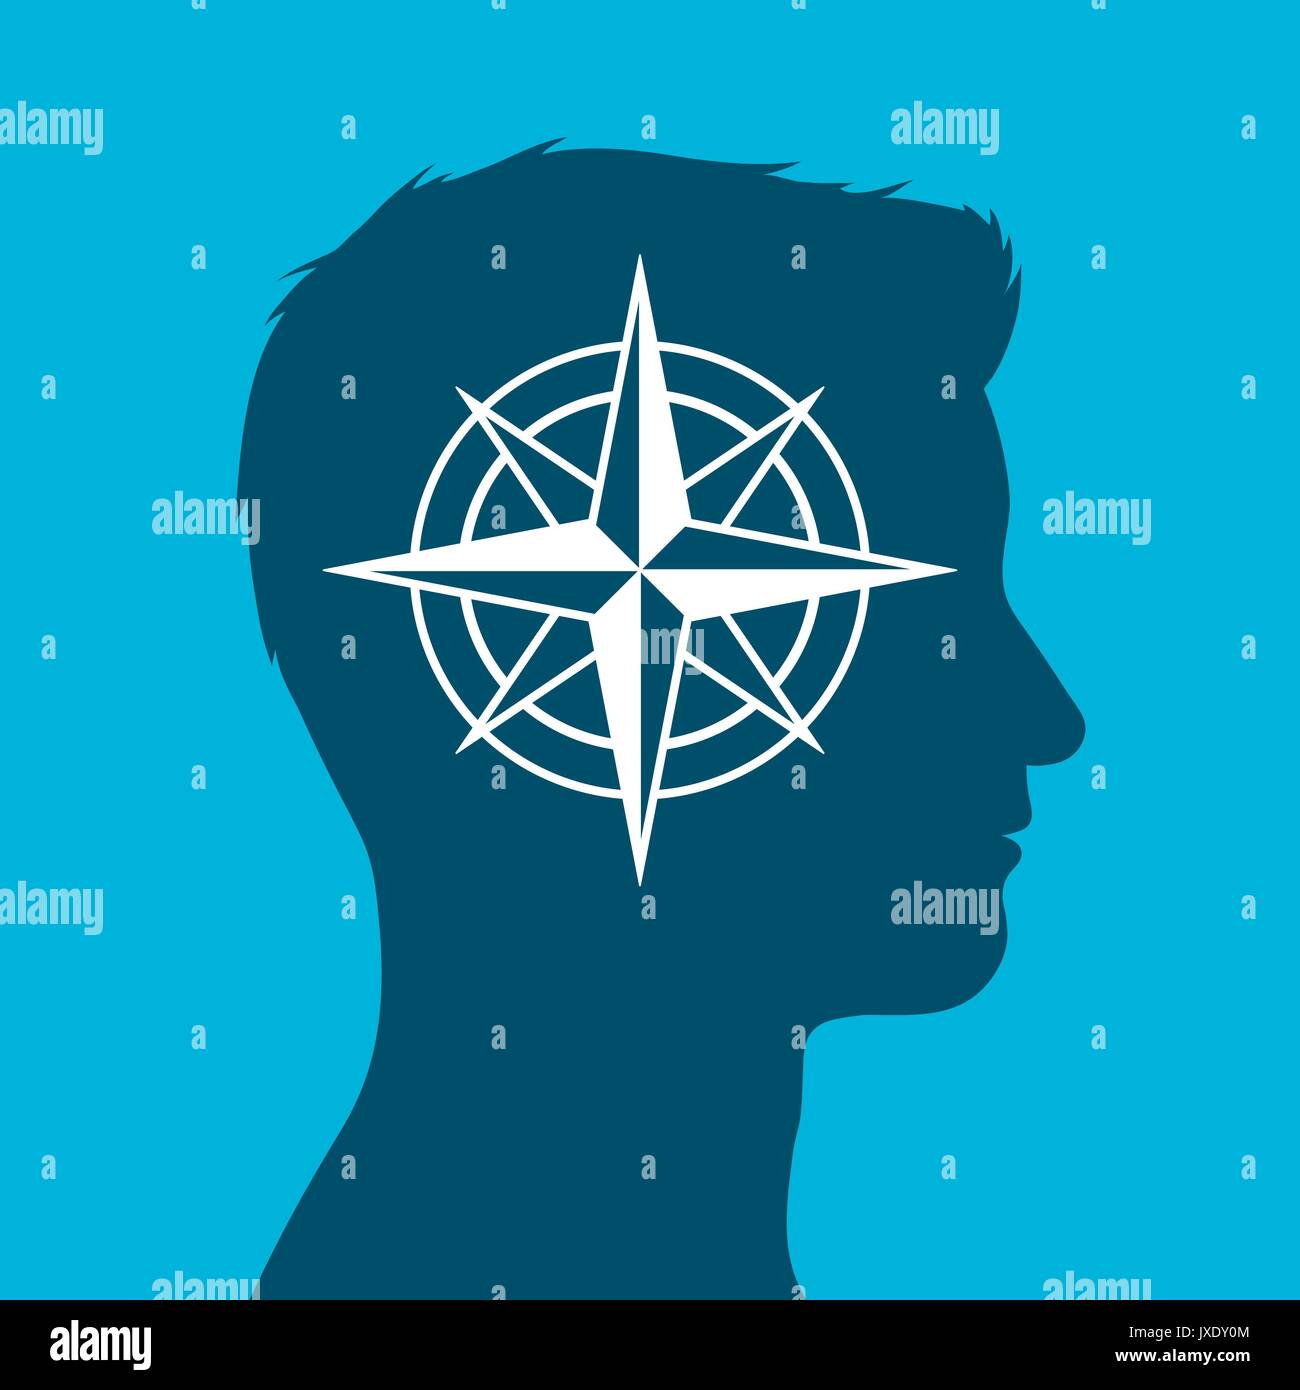 Human head in silhouette with compass rose sign inset against a blue background, vector illustration Stock Vector